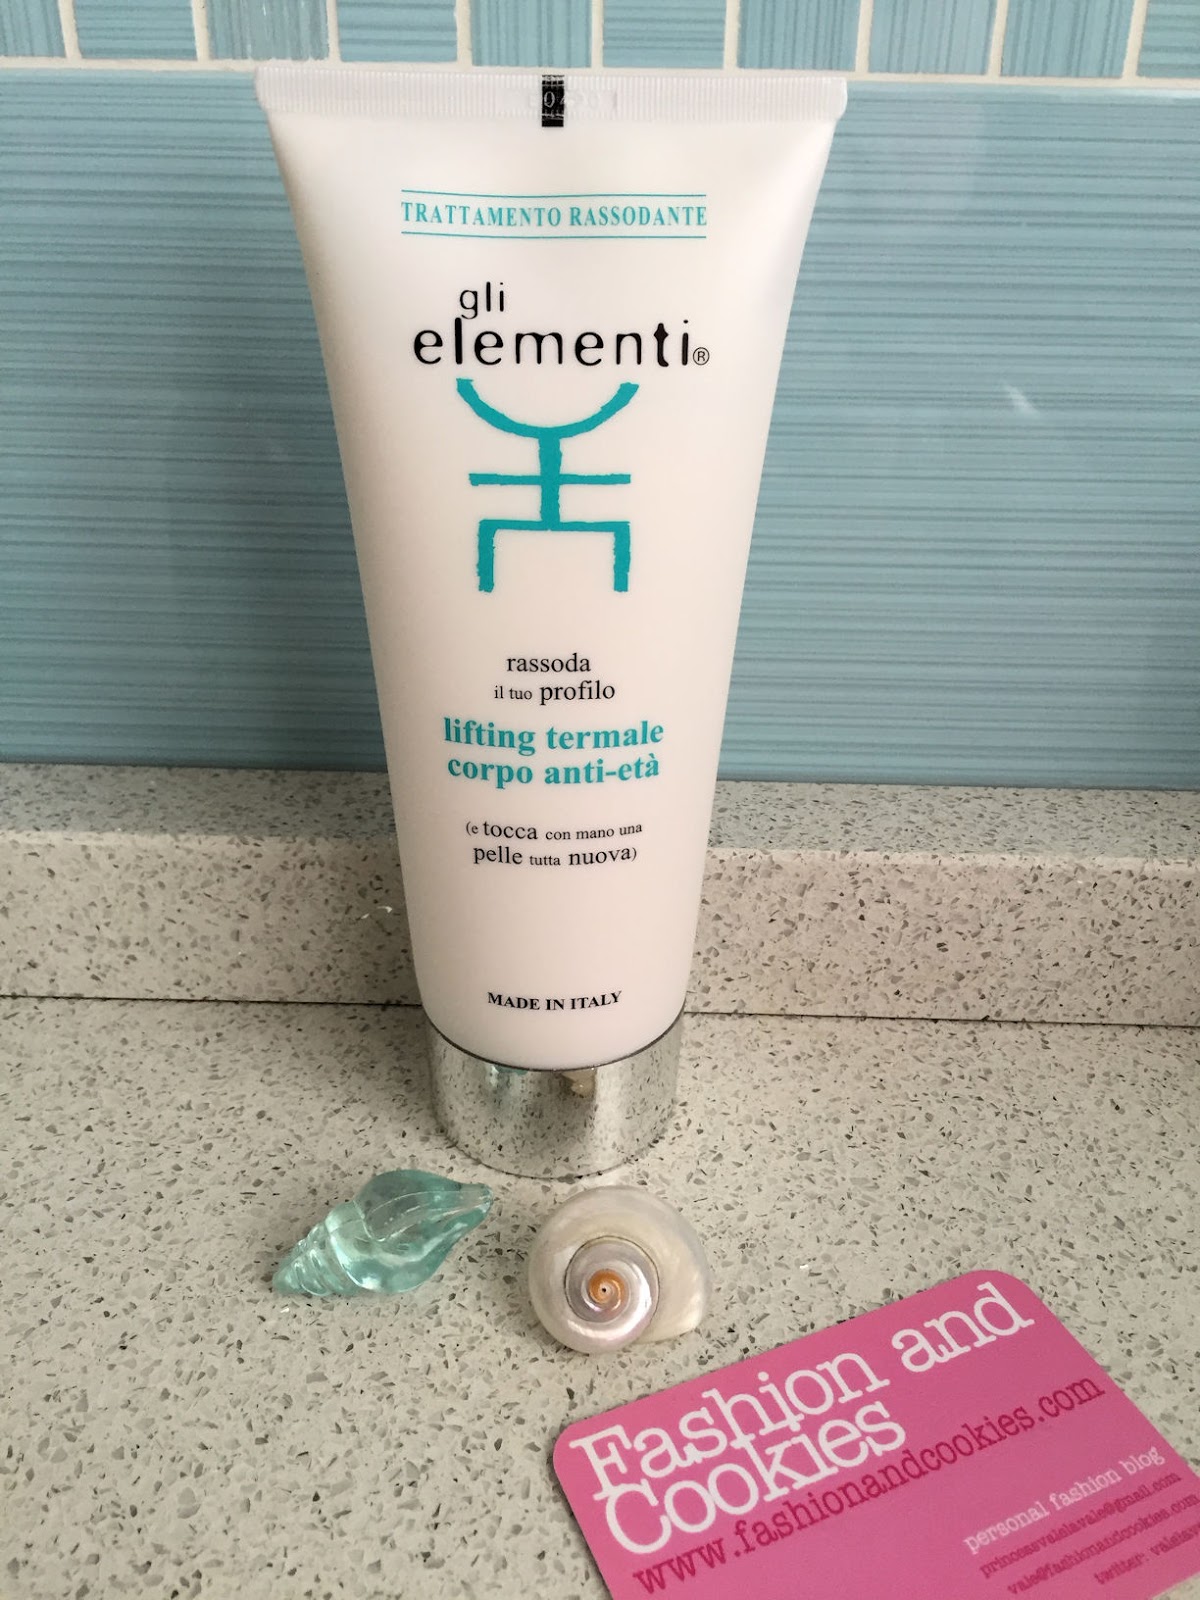 Home SPA secrets: Gli Elementi lifting anti age cream, skincare geothermal cosmetic products on Fashion and Cookies beauty blog, beauty blogger